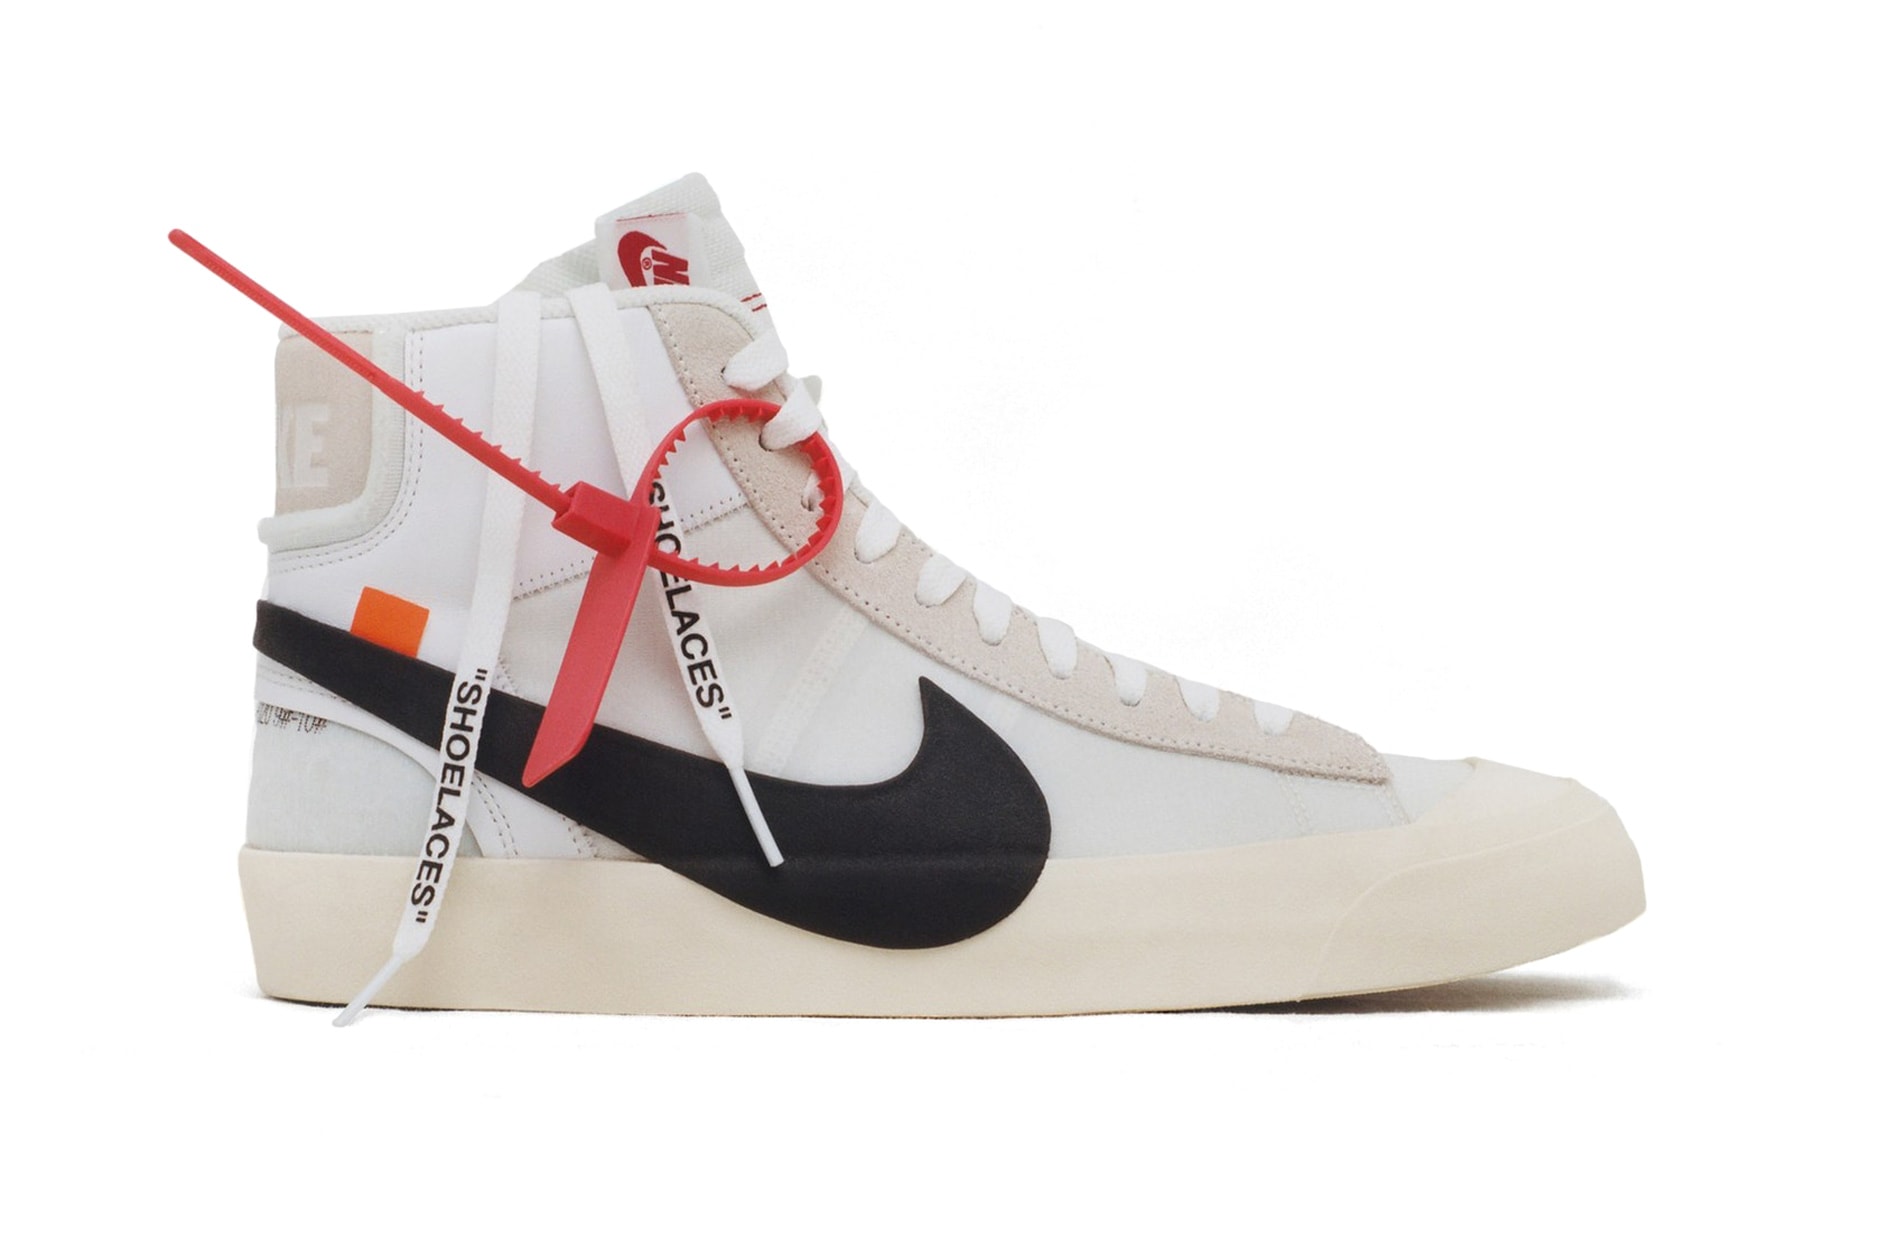 Off White Nike Blazer Studio Mid Wolf Grey virgil abloh pure platinum black cool grey the ten 10 2018 release date info drop sneakers shoes footwear collaboration